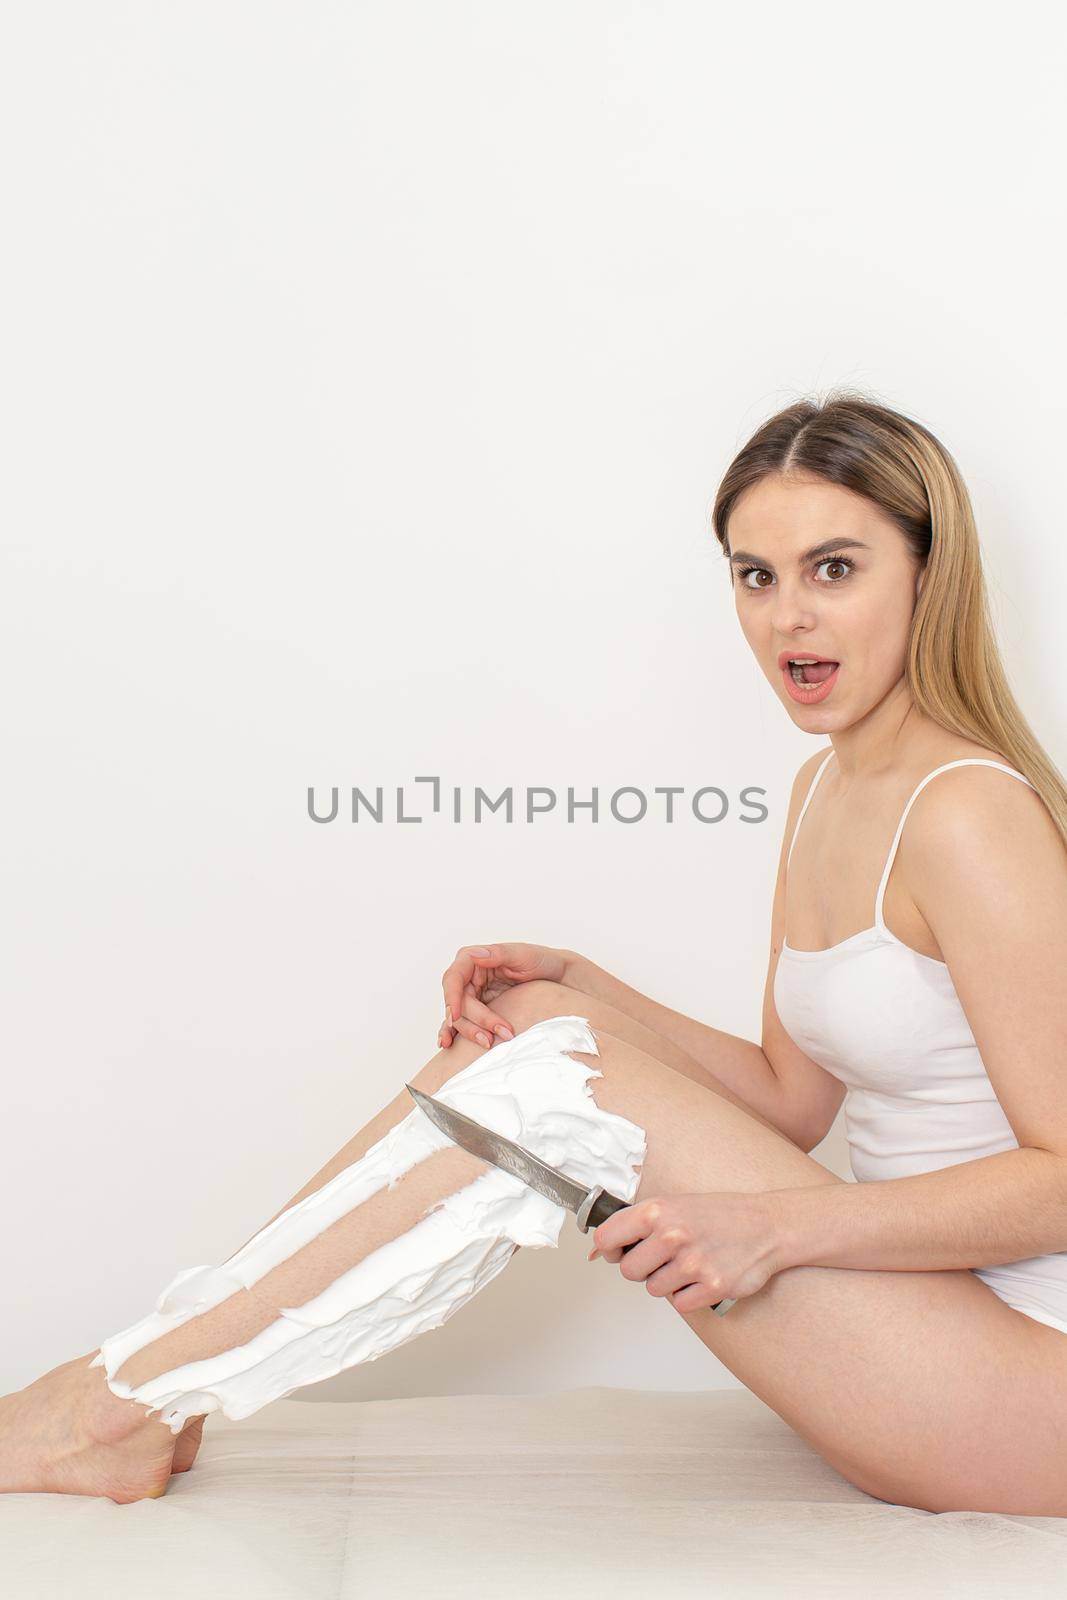 Beautiful caucasian woman shaving her legs with a knife with shaving foam on white background. Depilation and epilation concept. by okskukuruza